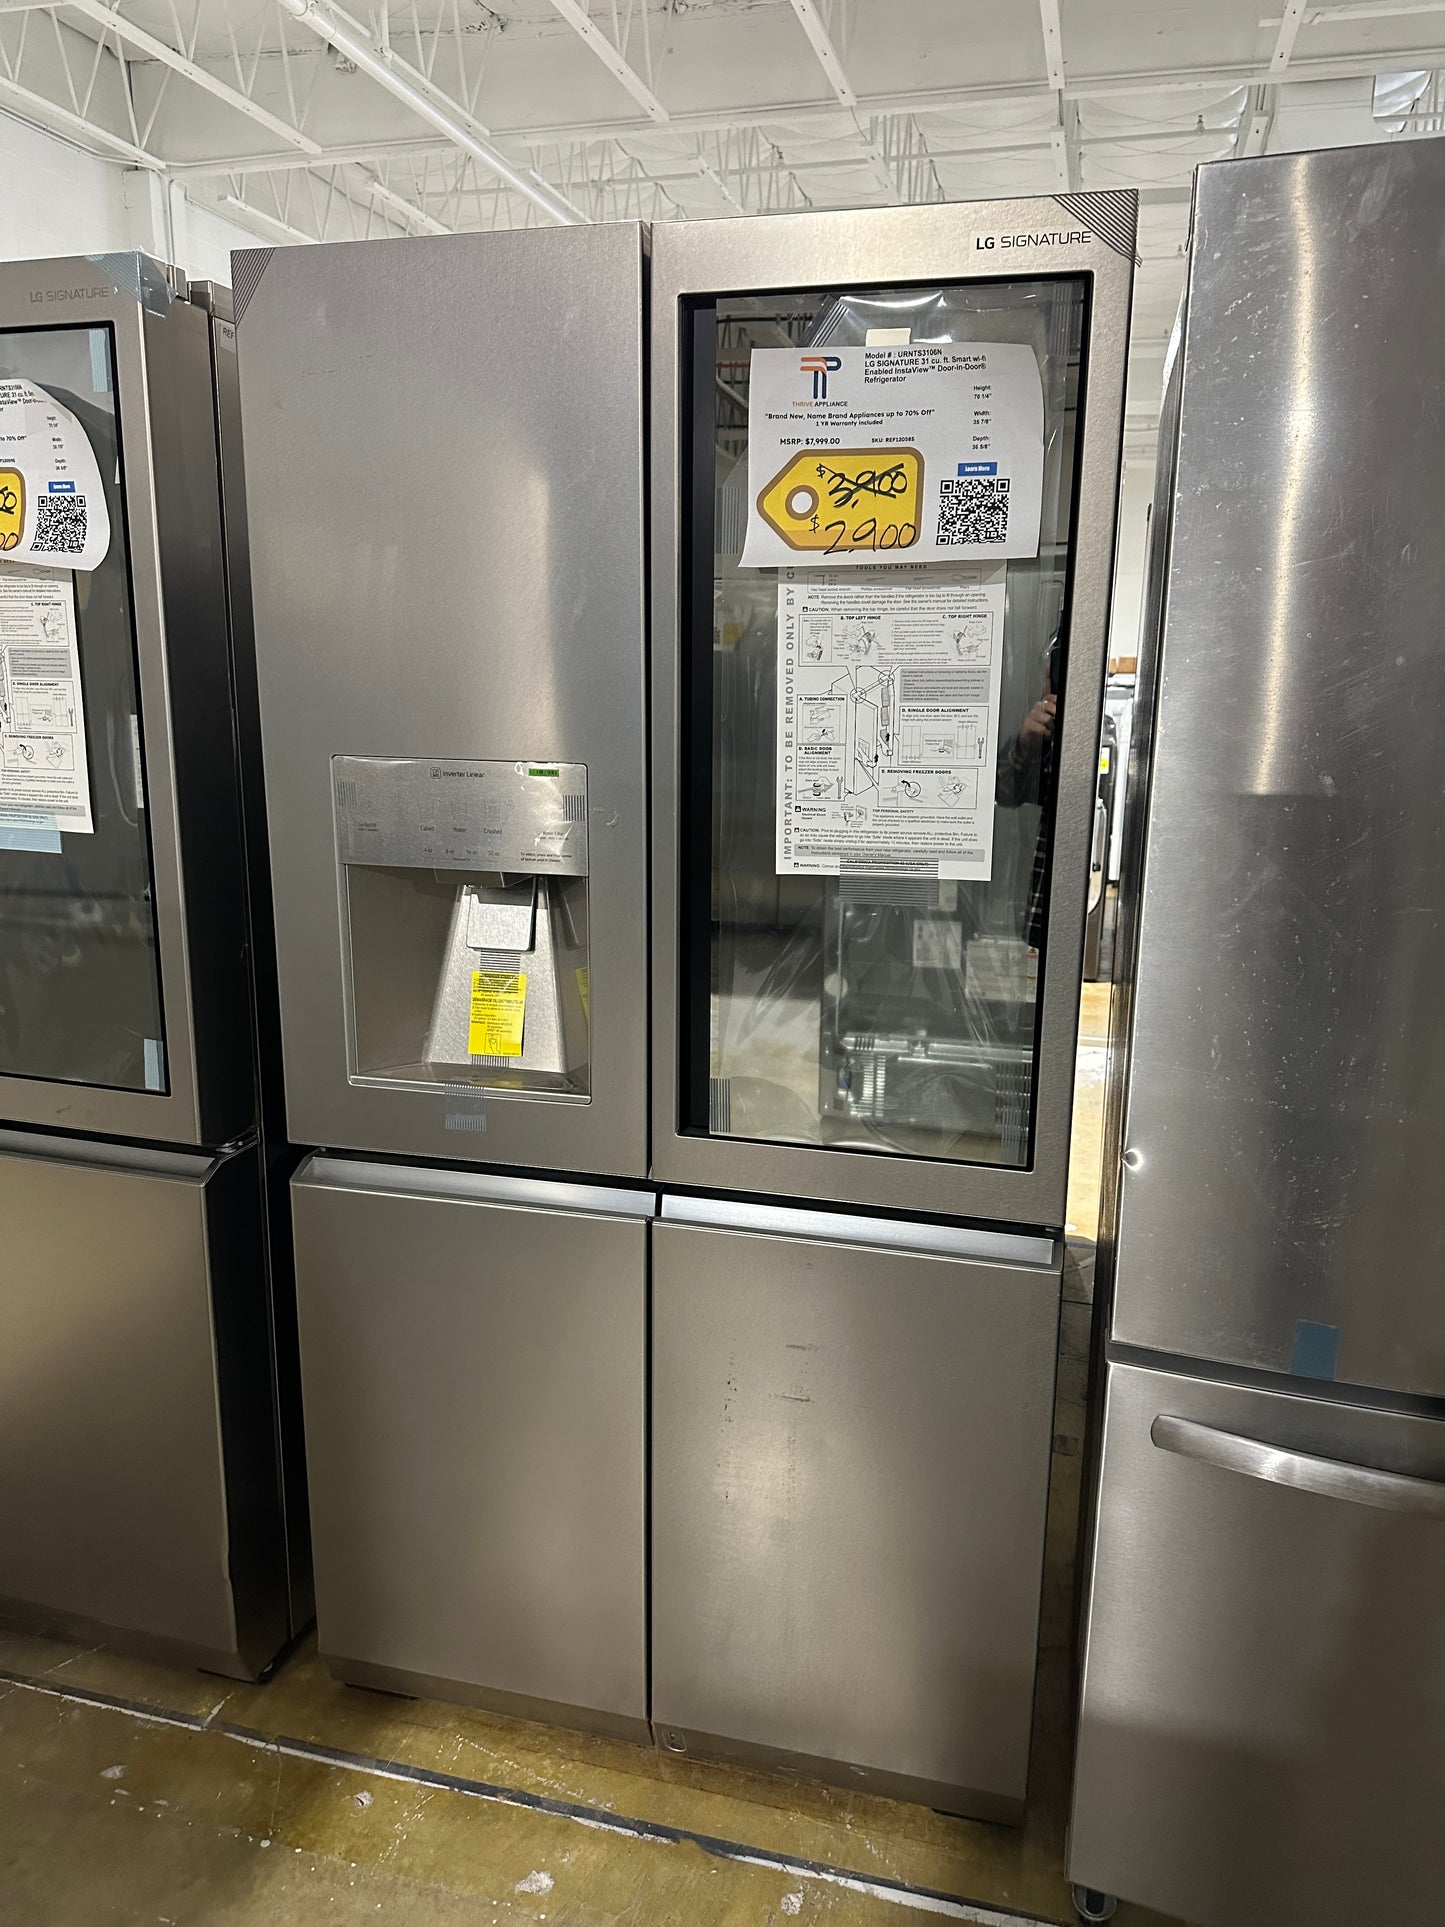 MAKE AN OFFER! GREAT NEW FRENCH DOOR LG SIGNATURE REFRIGERATOR - REF12058S URNTS3106N